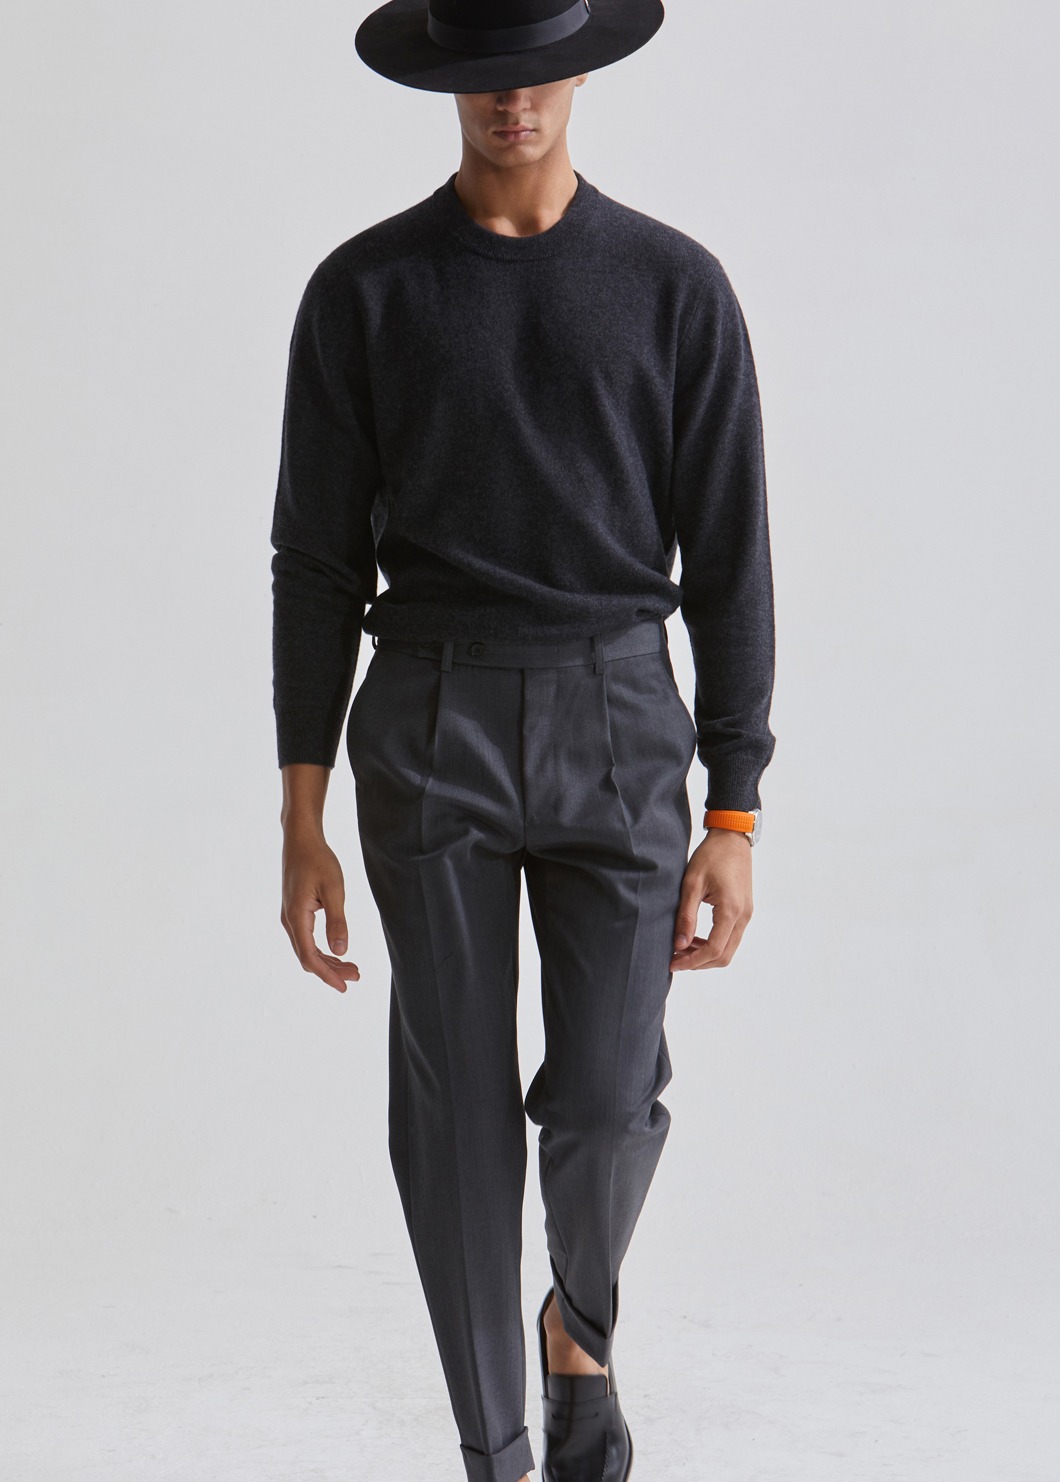 Cashmere Round Knit-Charcoal